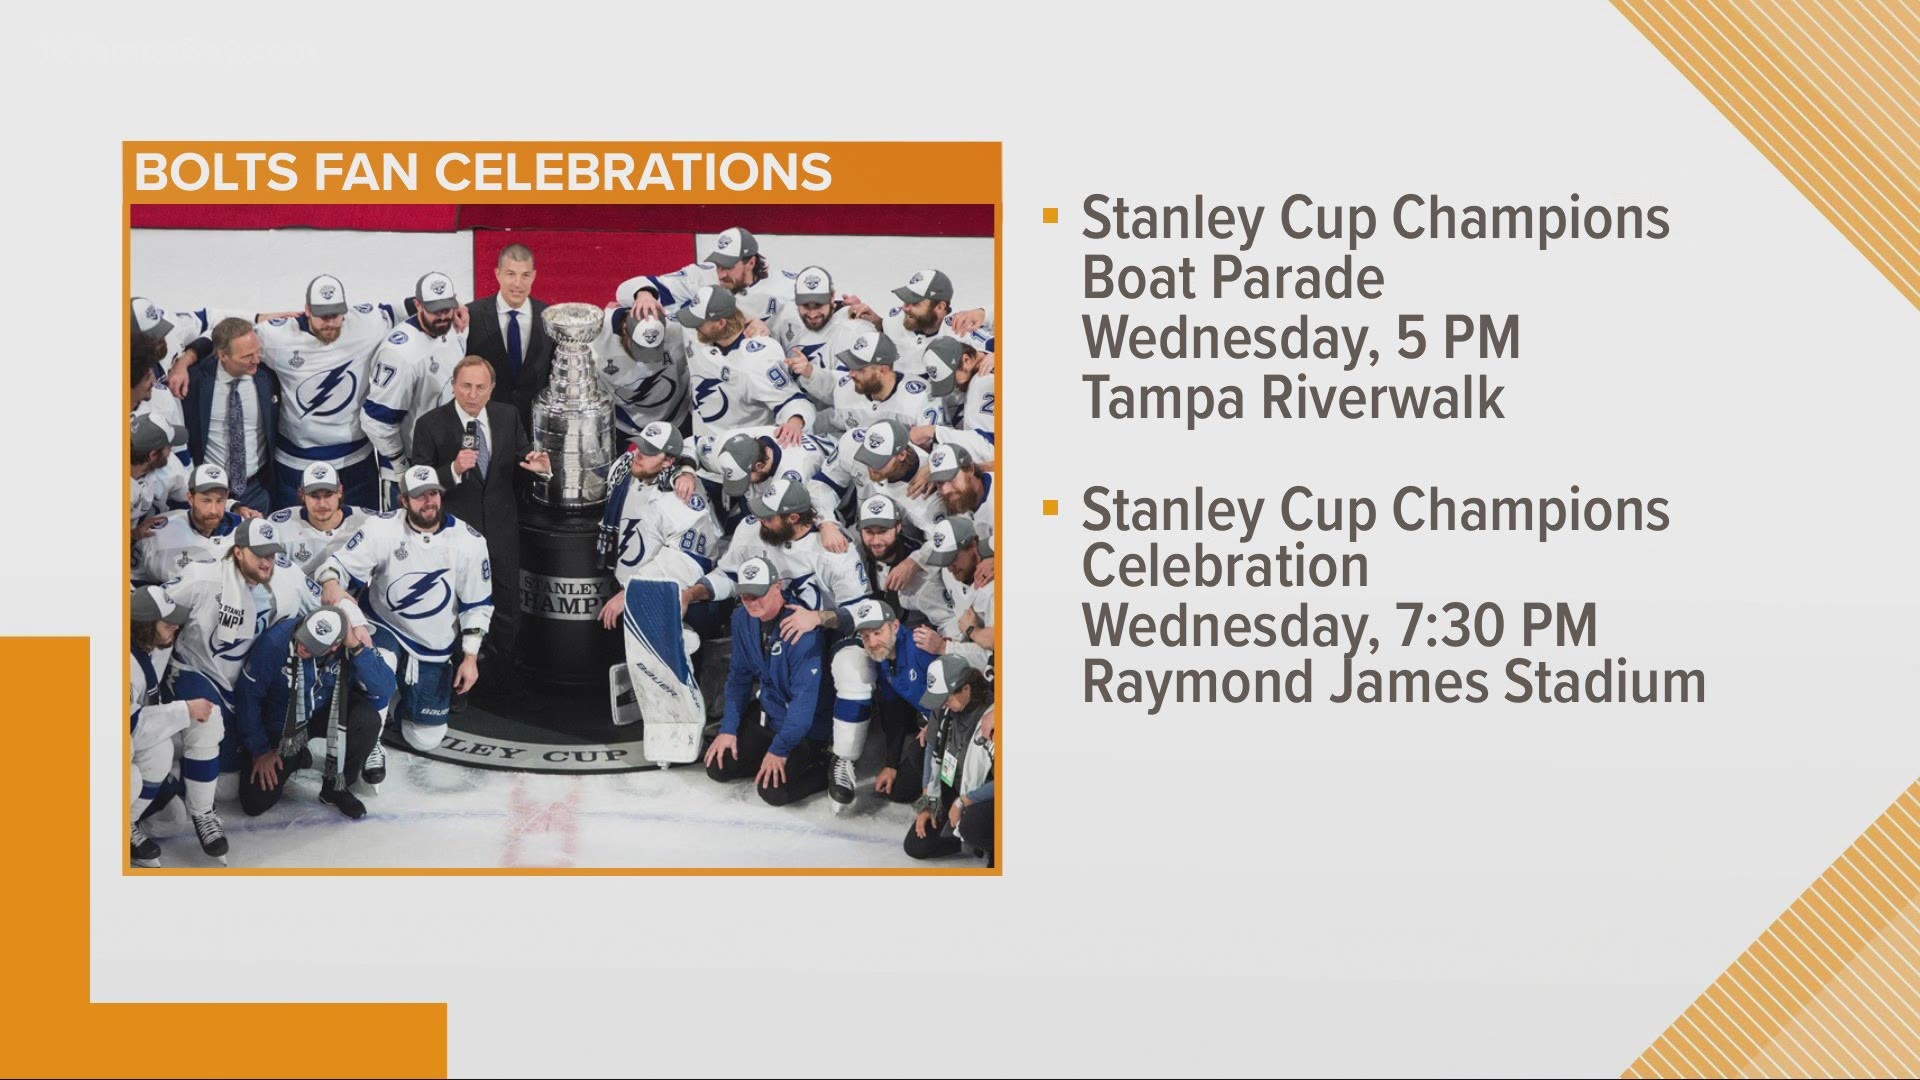 Here's where you can celebrate the return of the Stanley Cup to Tampa Bay.